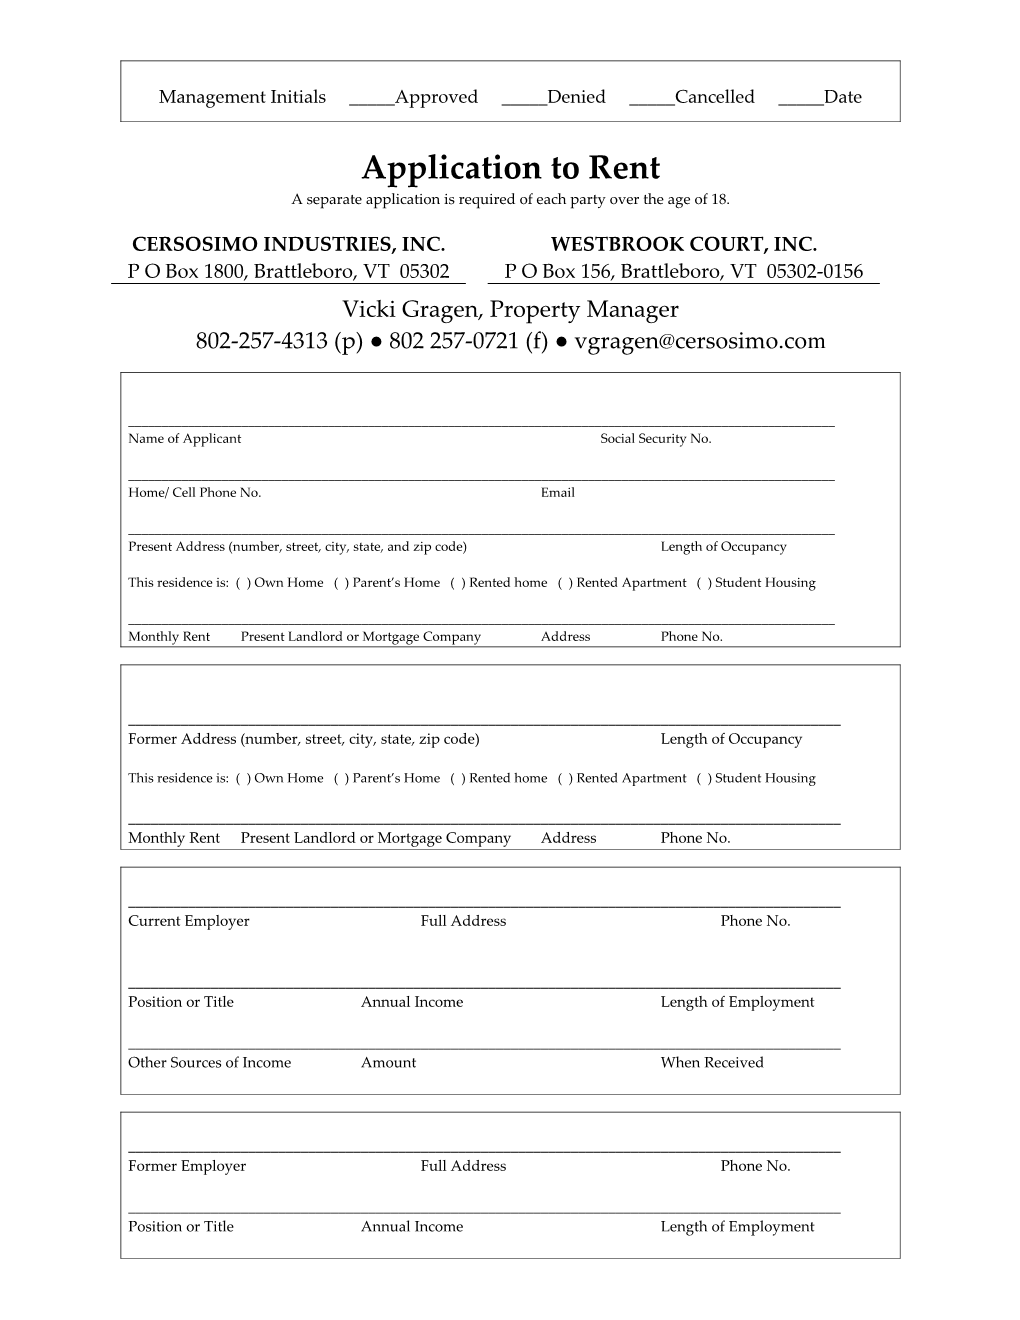 Application to Rent